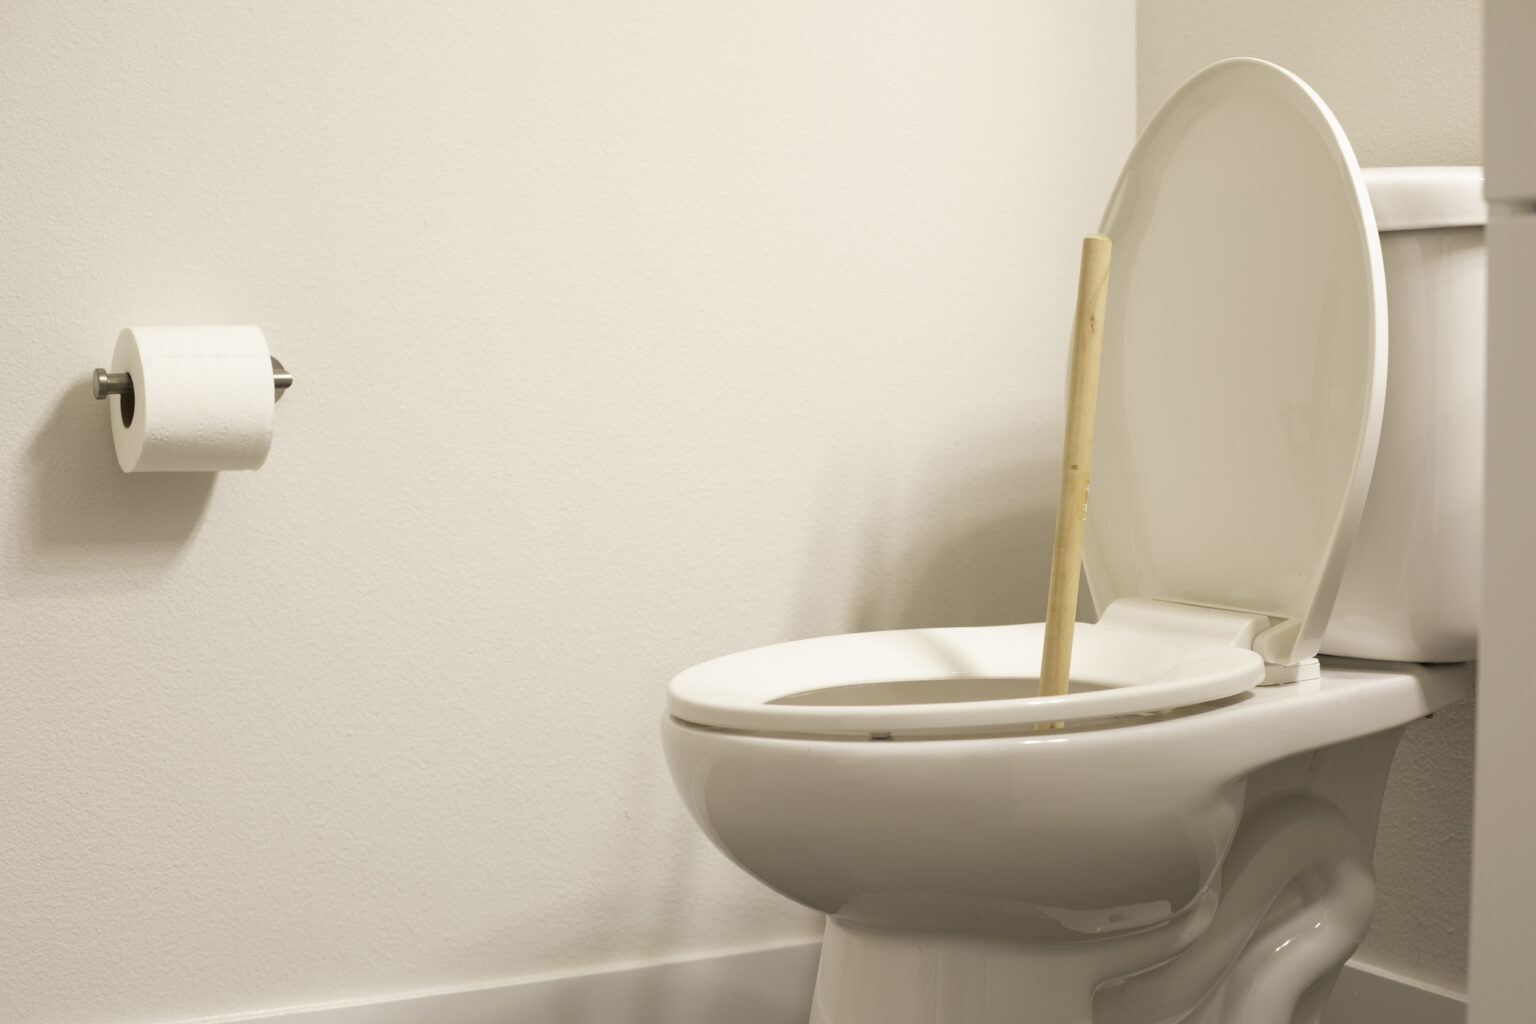 Why Does My Toilet Keep Clogging? - Phend Plumbing